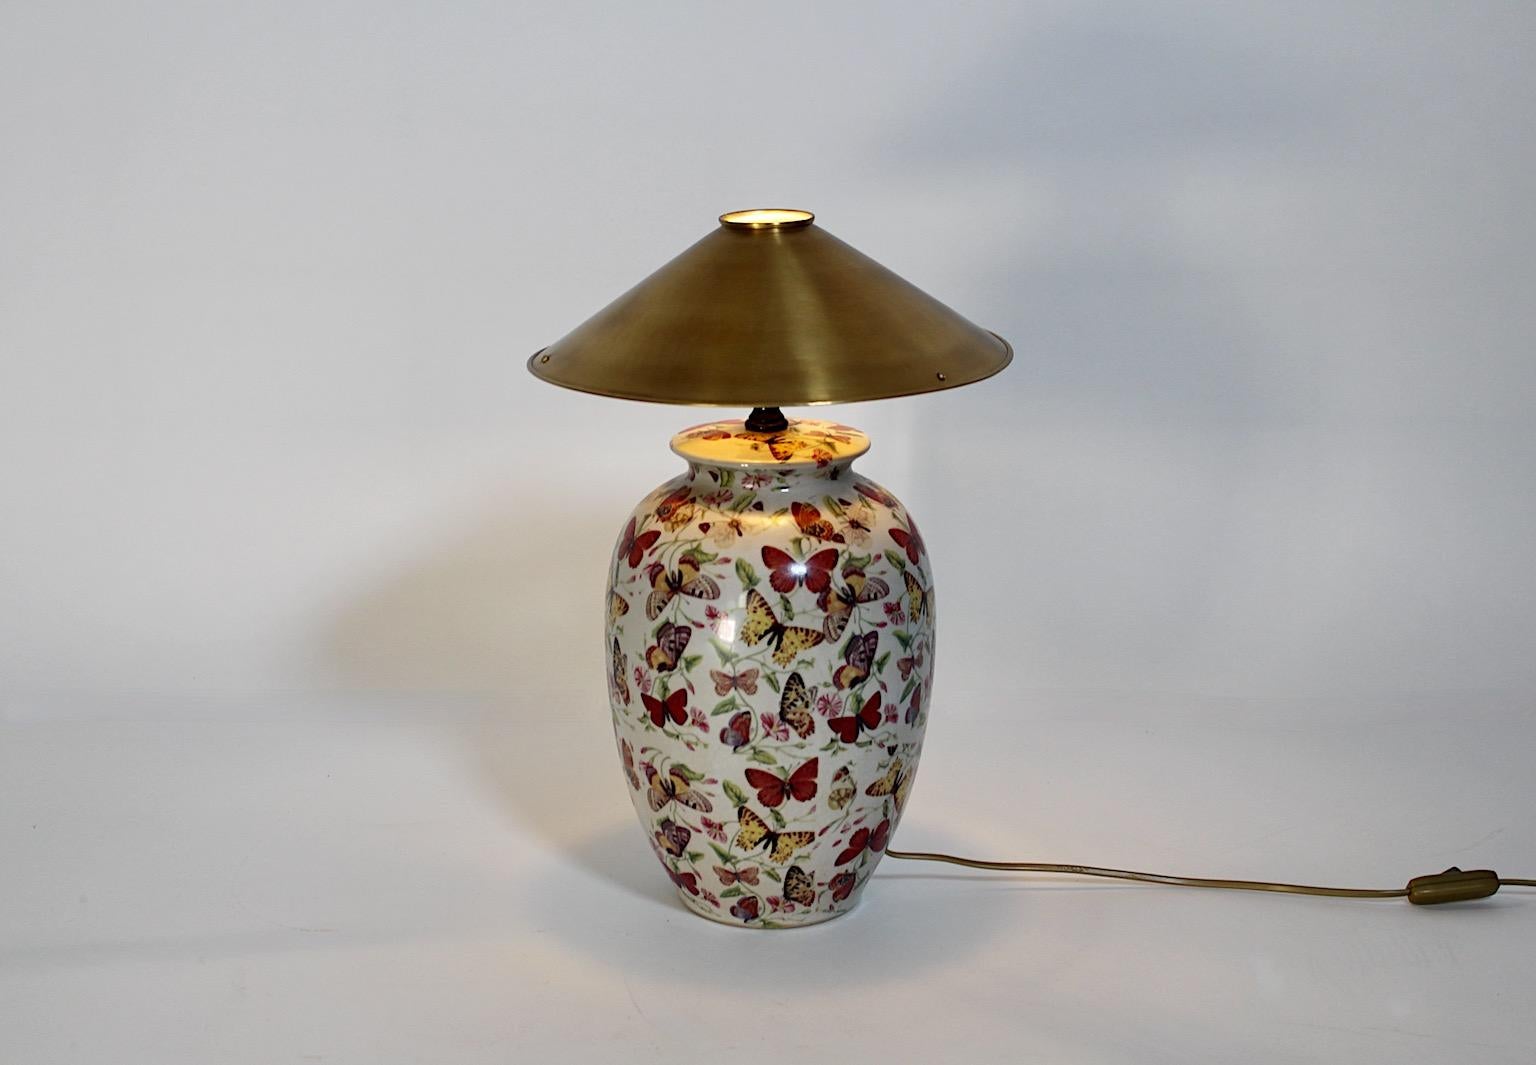 antique ceramic lamps with flowers